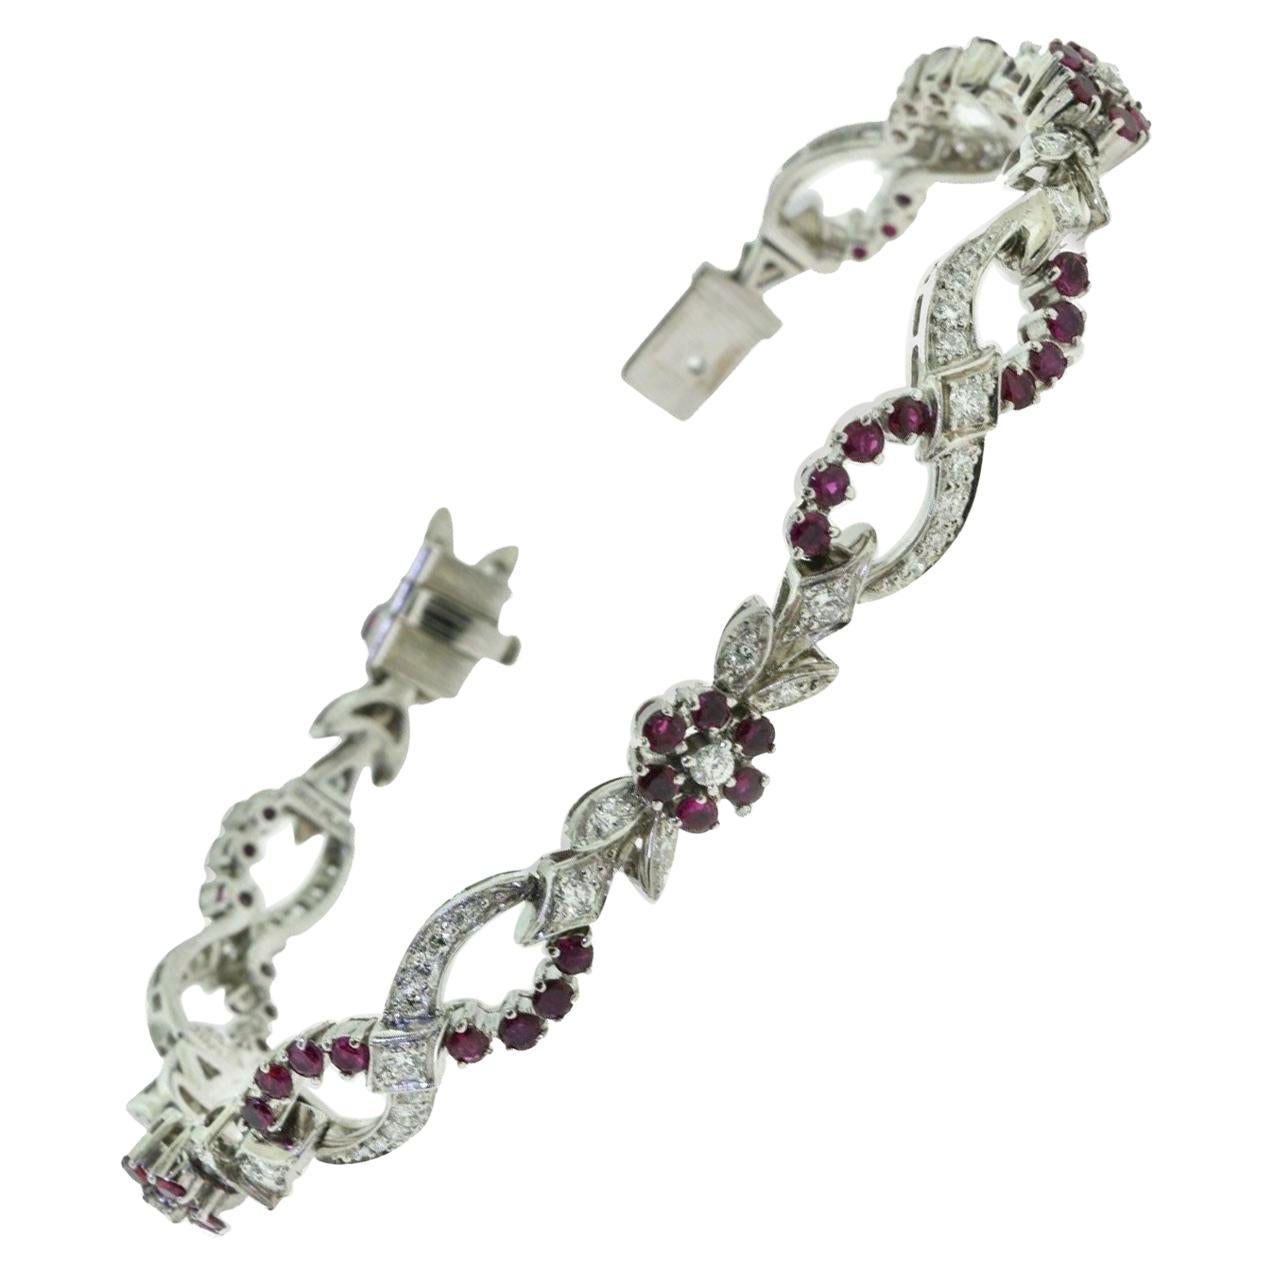 1940 Tiffany & Co. Diamond and Ruby Floral Bracelet in Platinum, Vintage